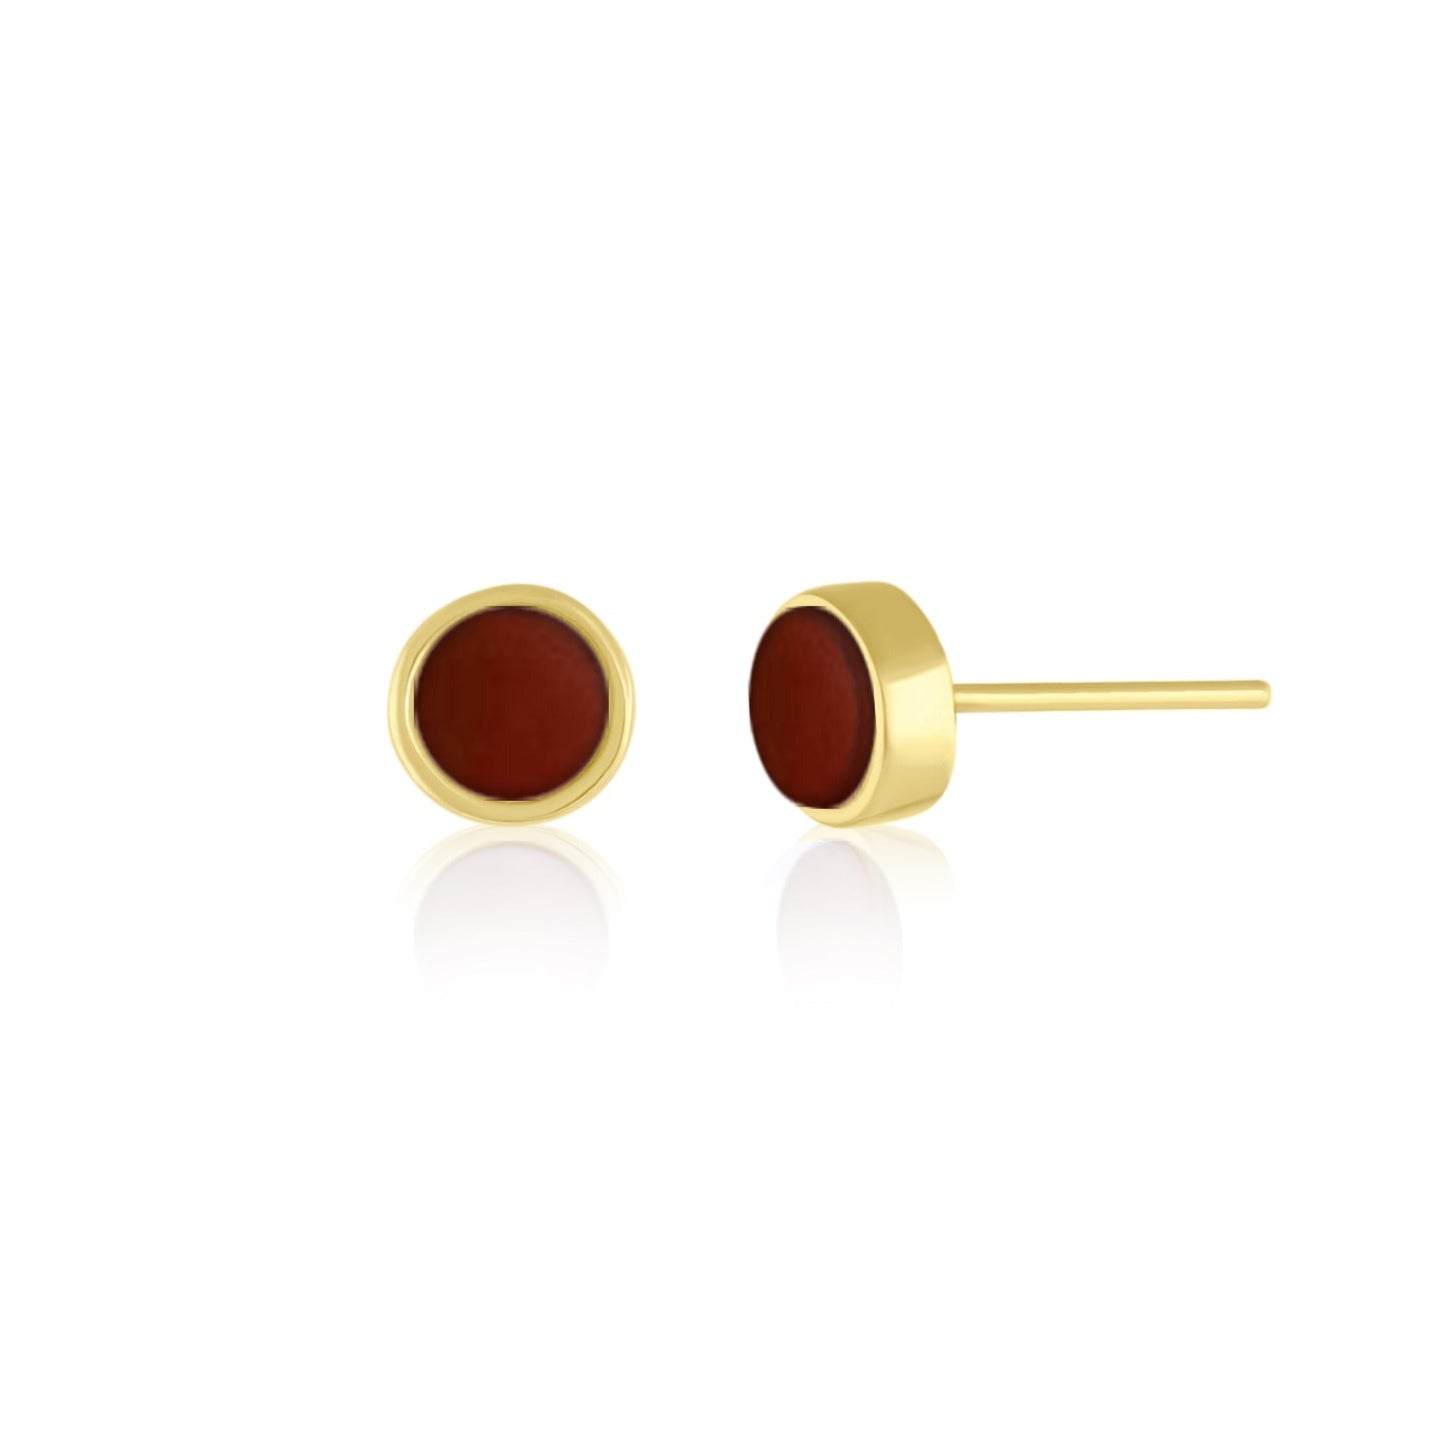 5mm Round Stud Yellow Gold Plated Earrings in Round Red Dyed Dolomite Natural Gemstone Made by Born to Rock. Online Jewelry Store Based in San Diego California